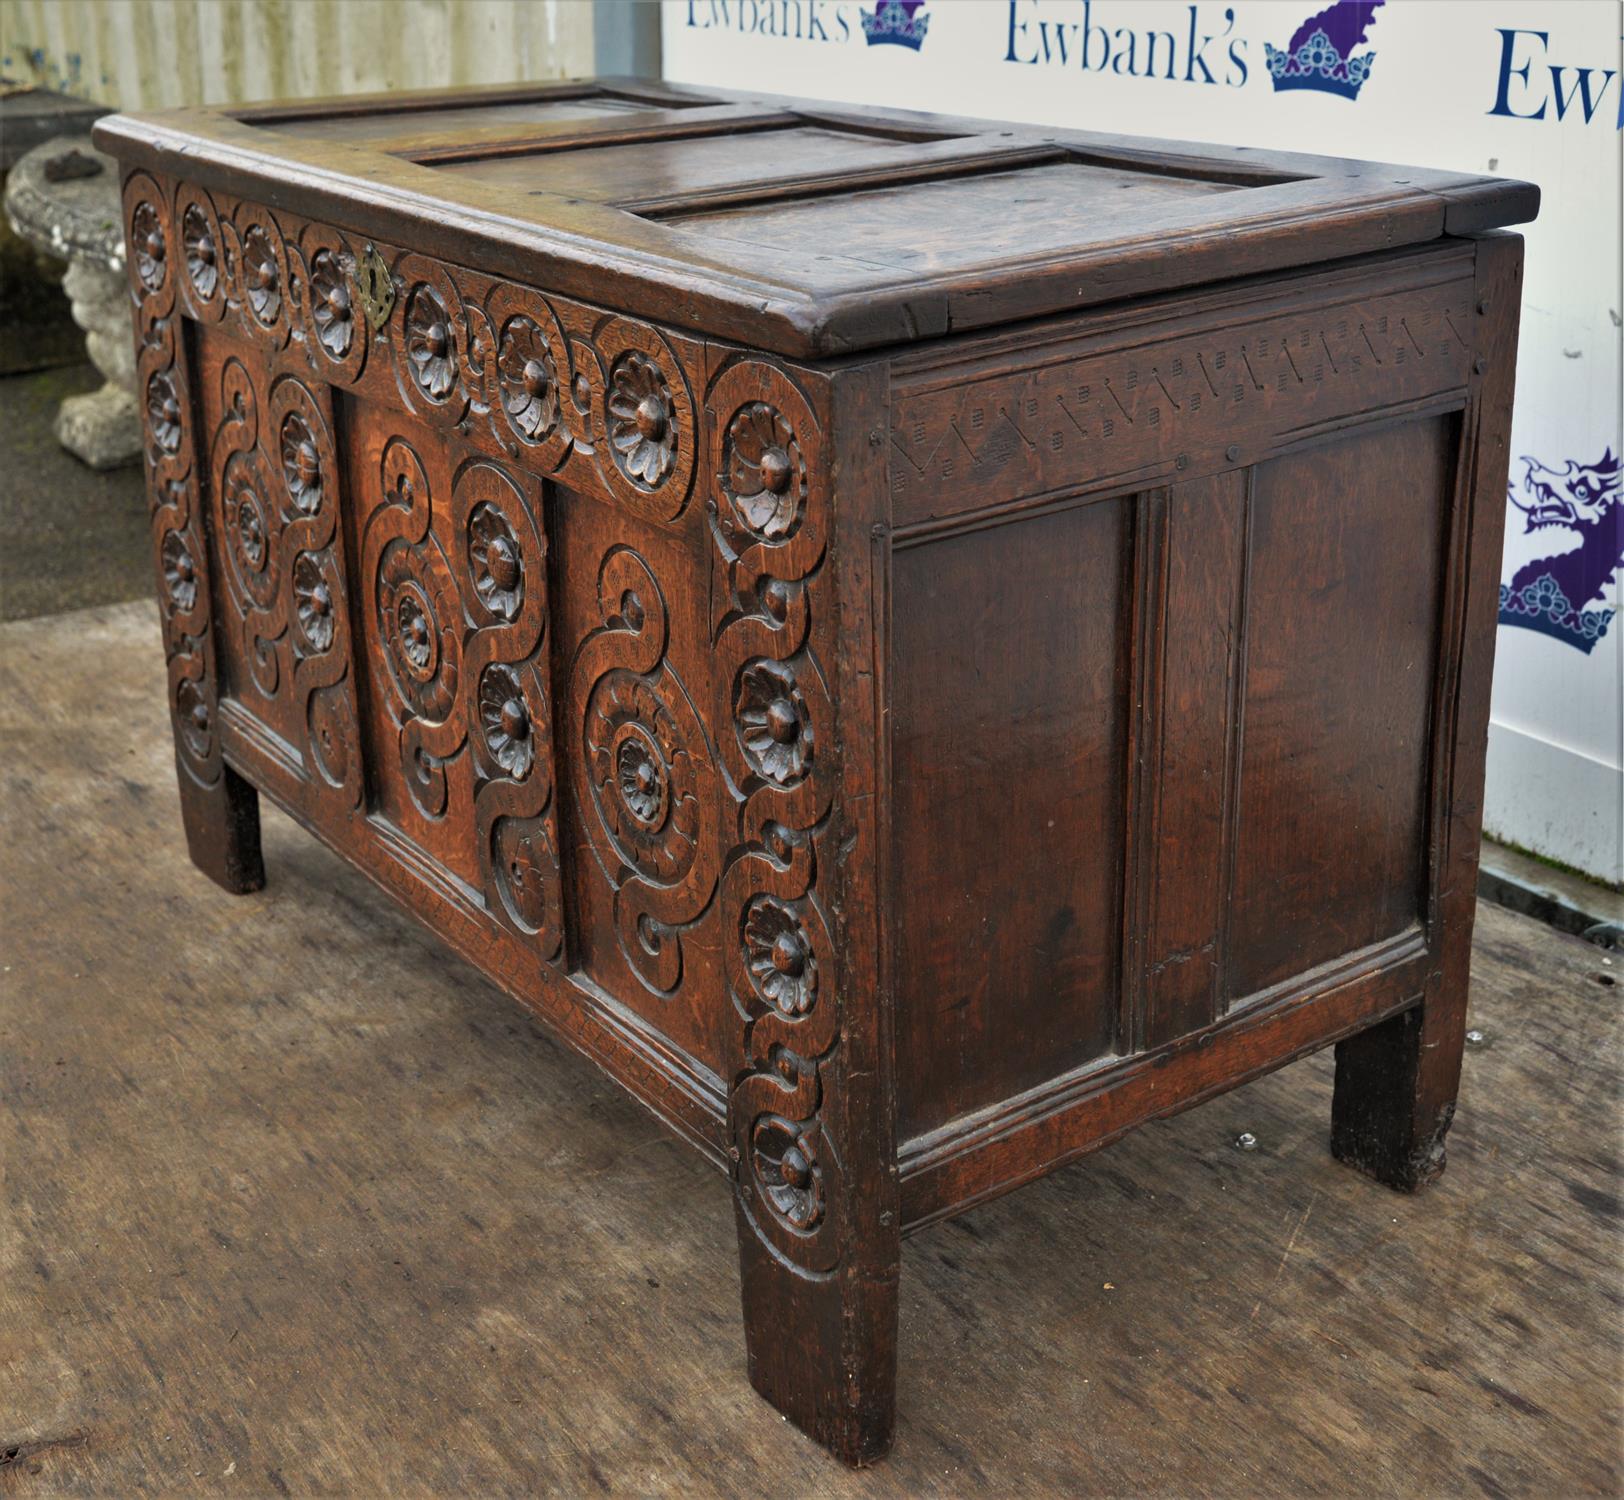 Oak chest, late 17th/early 18th Century, possibly later carved to the facade with geometric designs, - Image 3 of 5